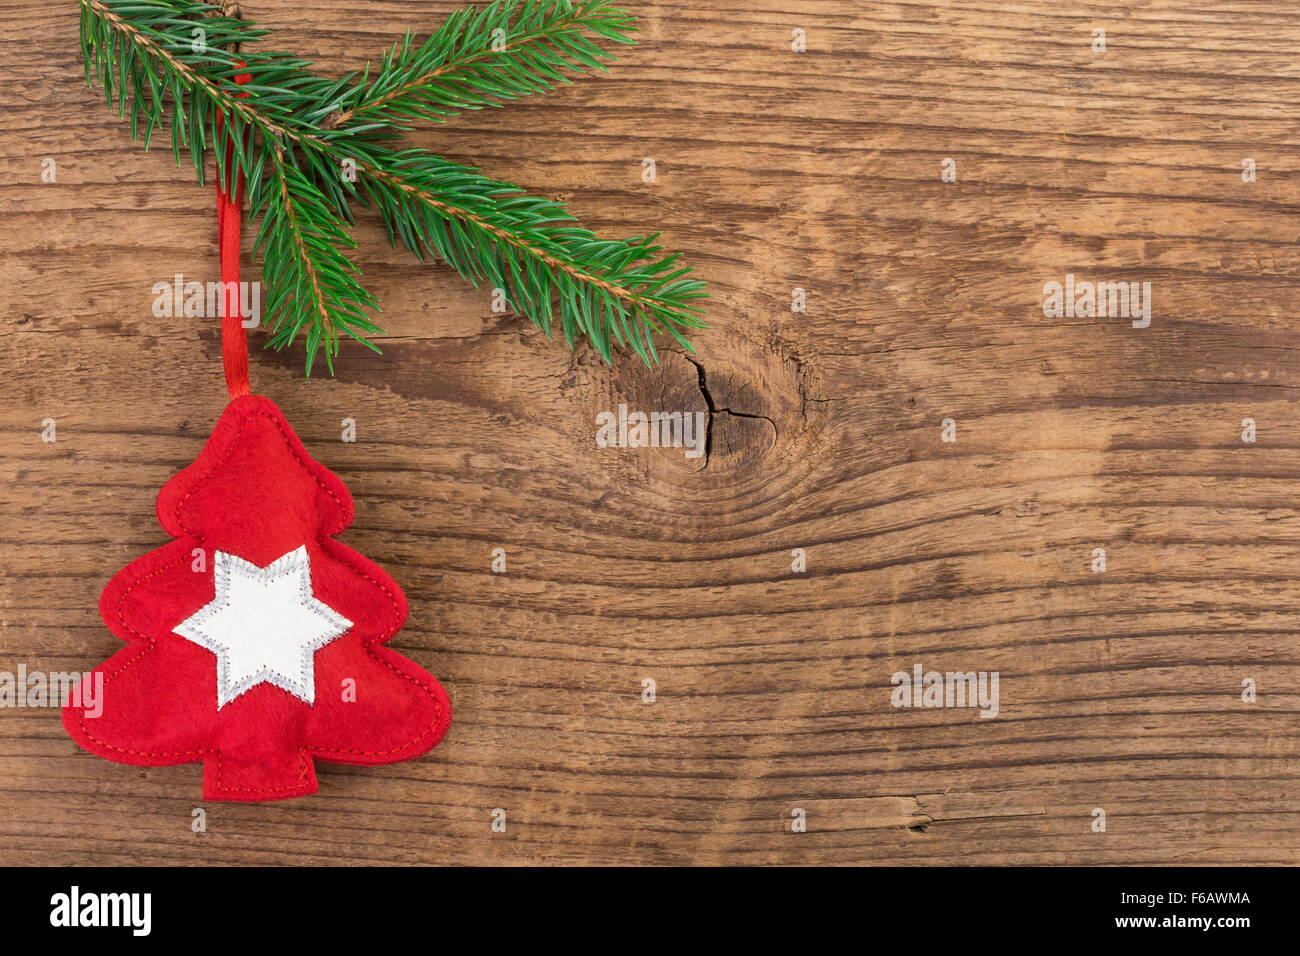 Christmas tree decoration with fir branch over wood Stock Photo